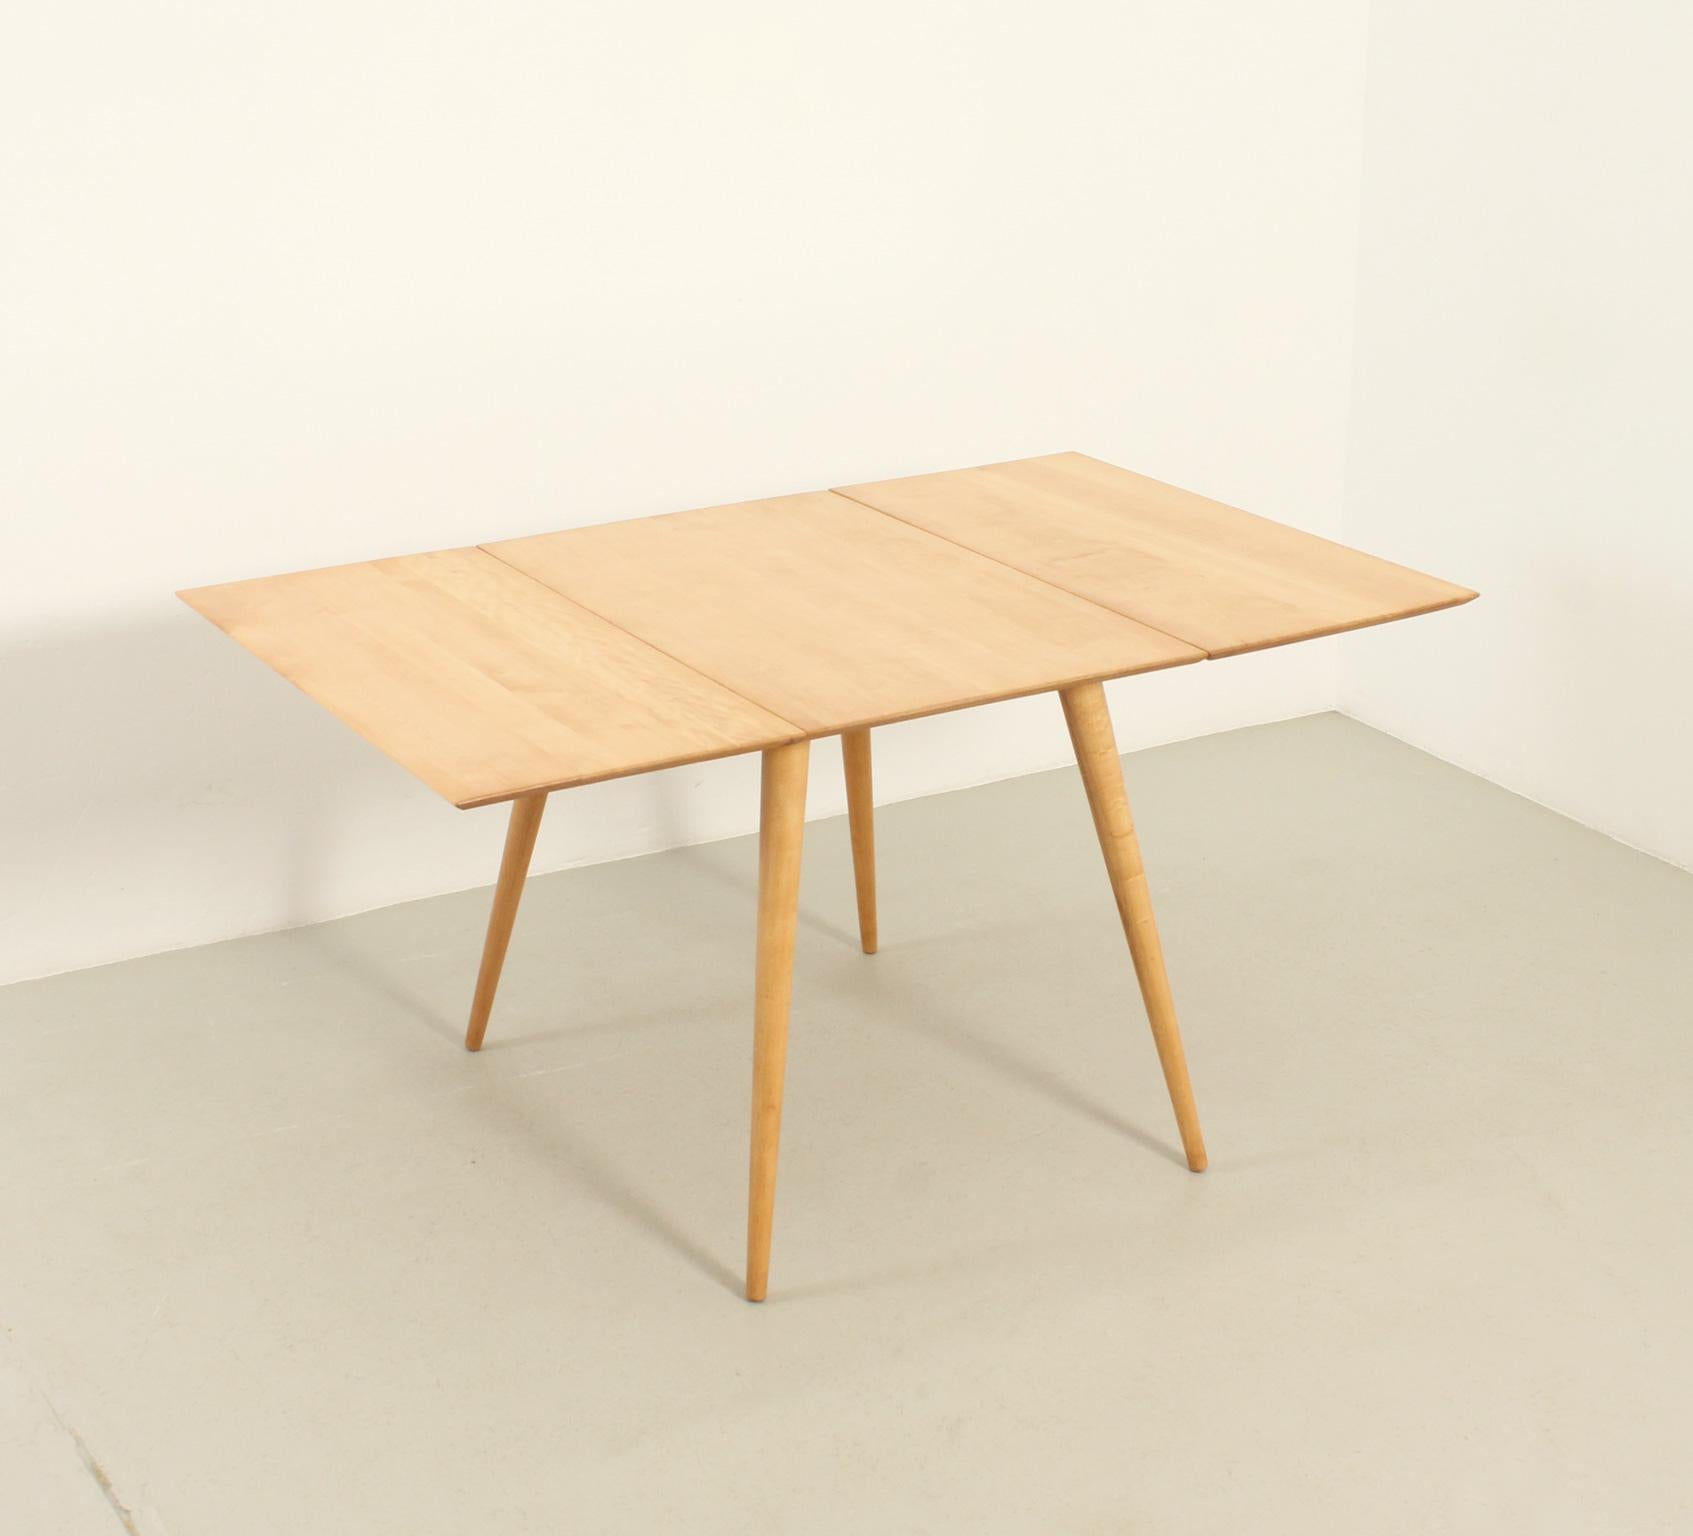 Wood Planner Group Drop-Leaf Dining Table by Paul McCobb, USA, 1950s For Sale